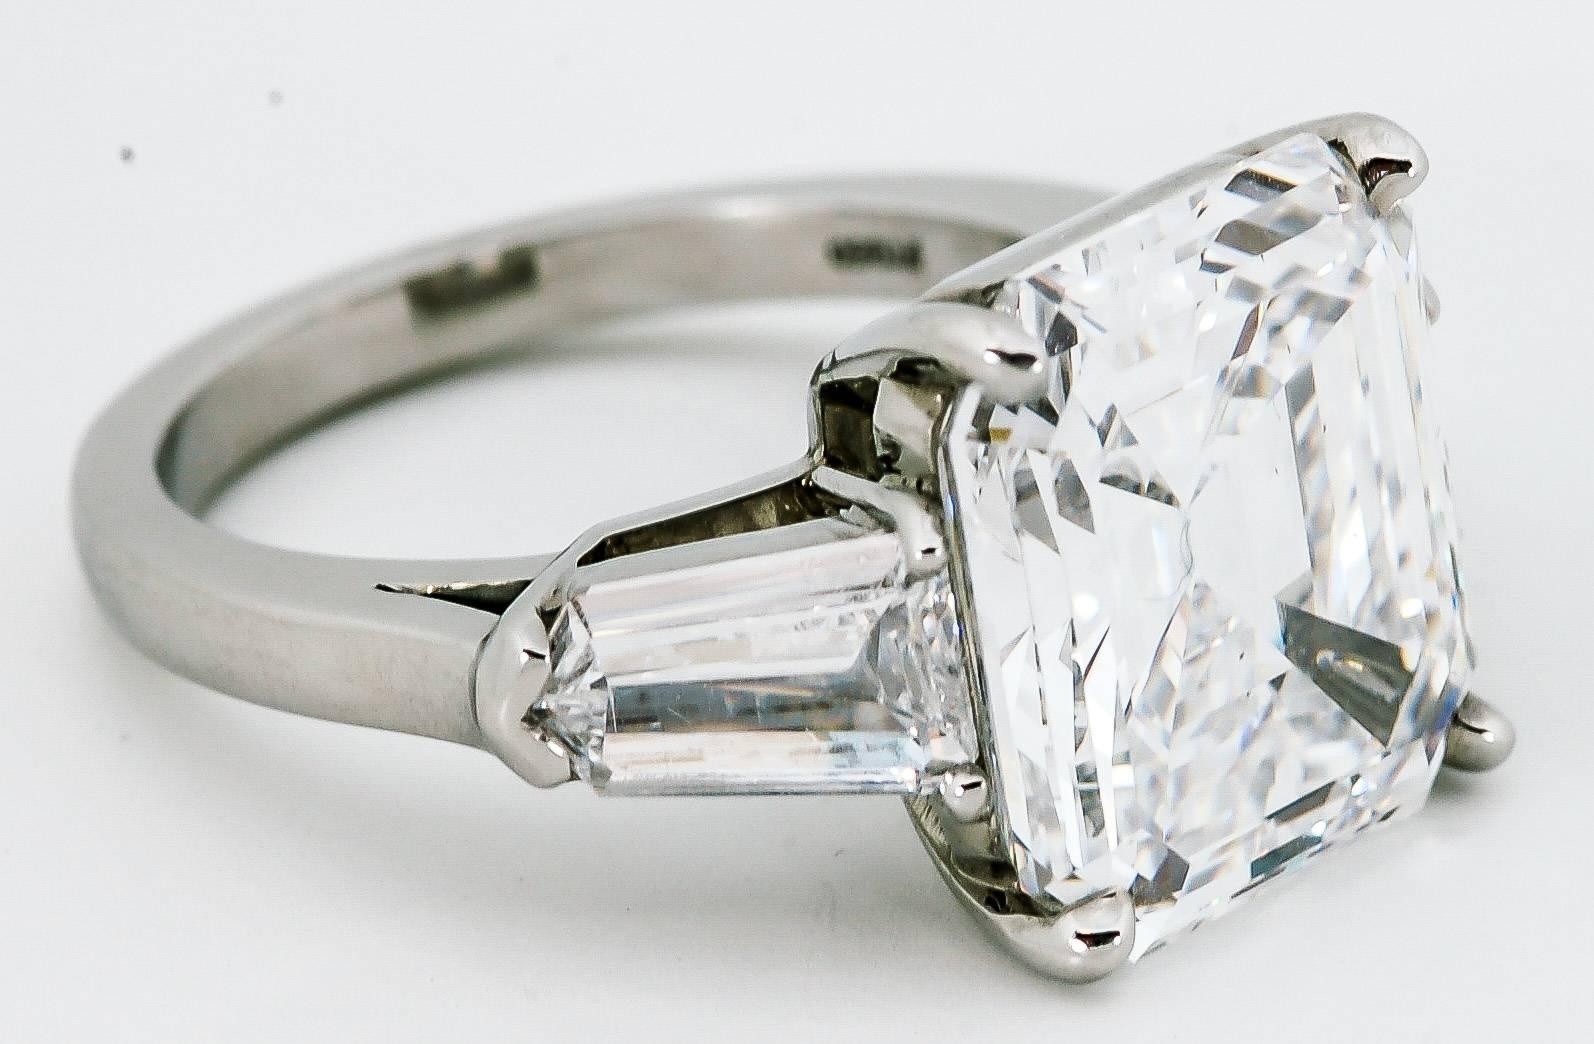 A dazzling 8.02 carat emerald cut diamond (clarity VS2 color D) is accented by two bullet cut diamonds weighing 1.33 carats total (clarity SI1 color D-E) in this lovely engagement ring that is sure to catch any eye.